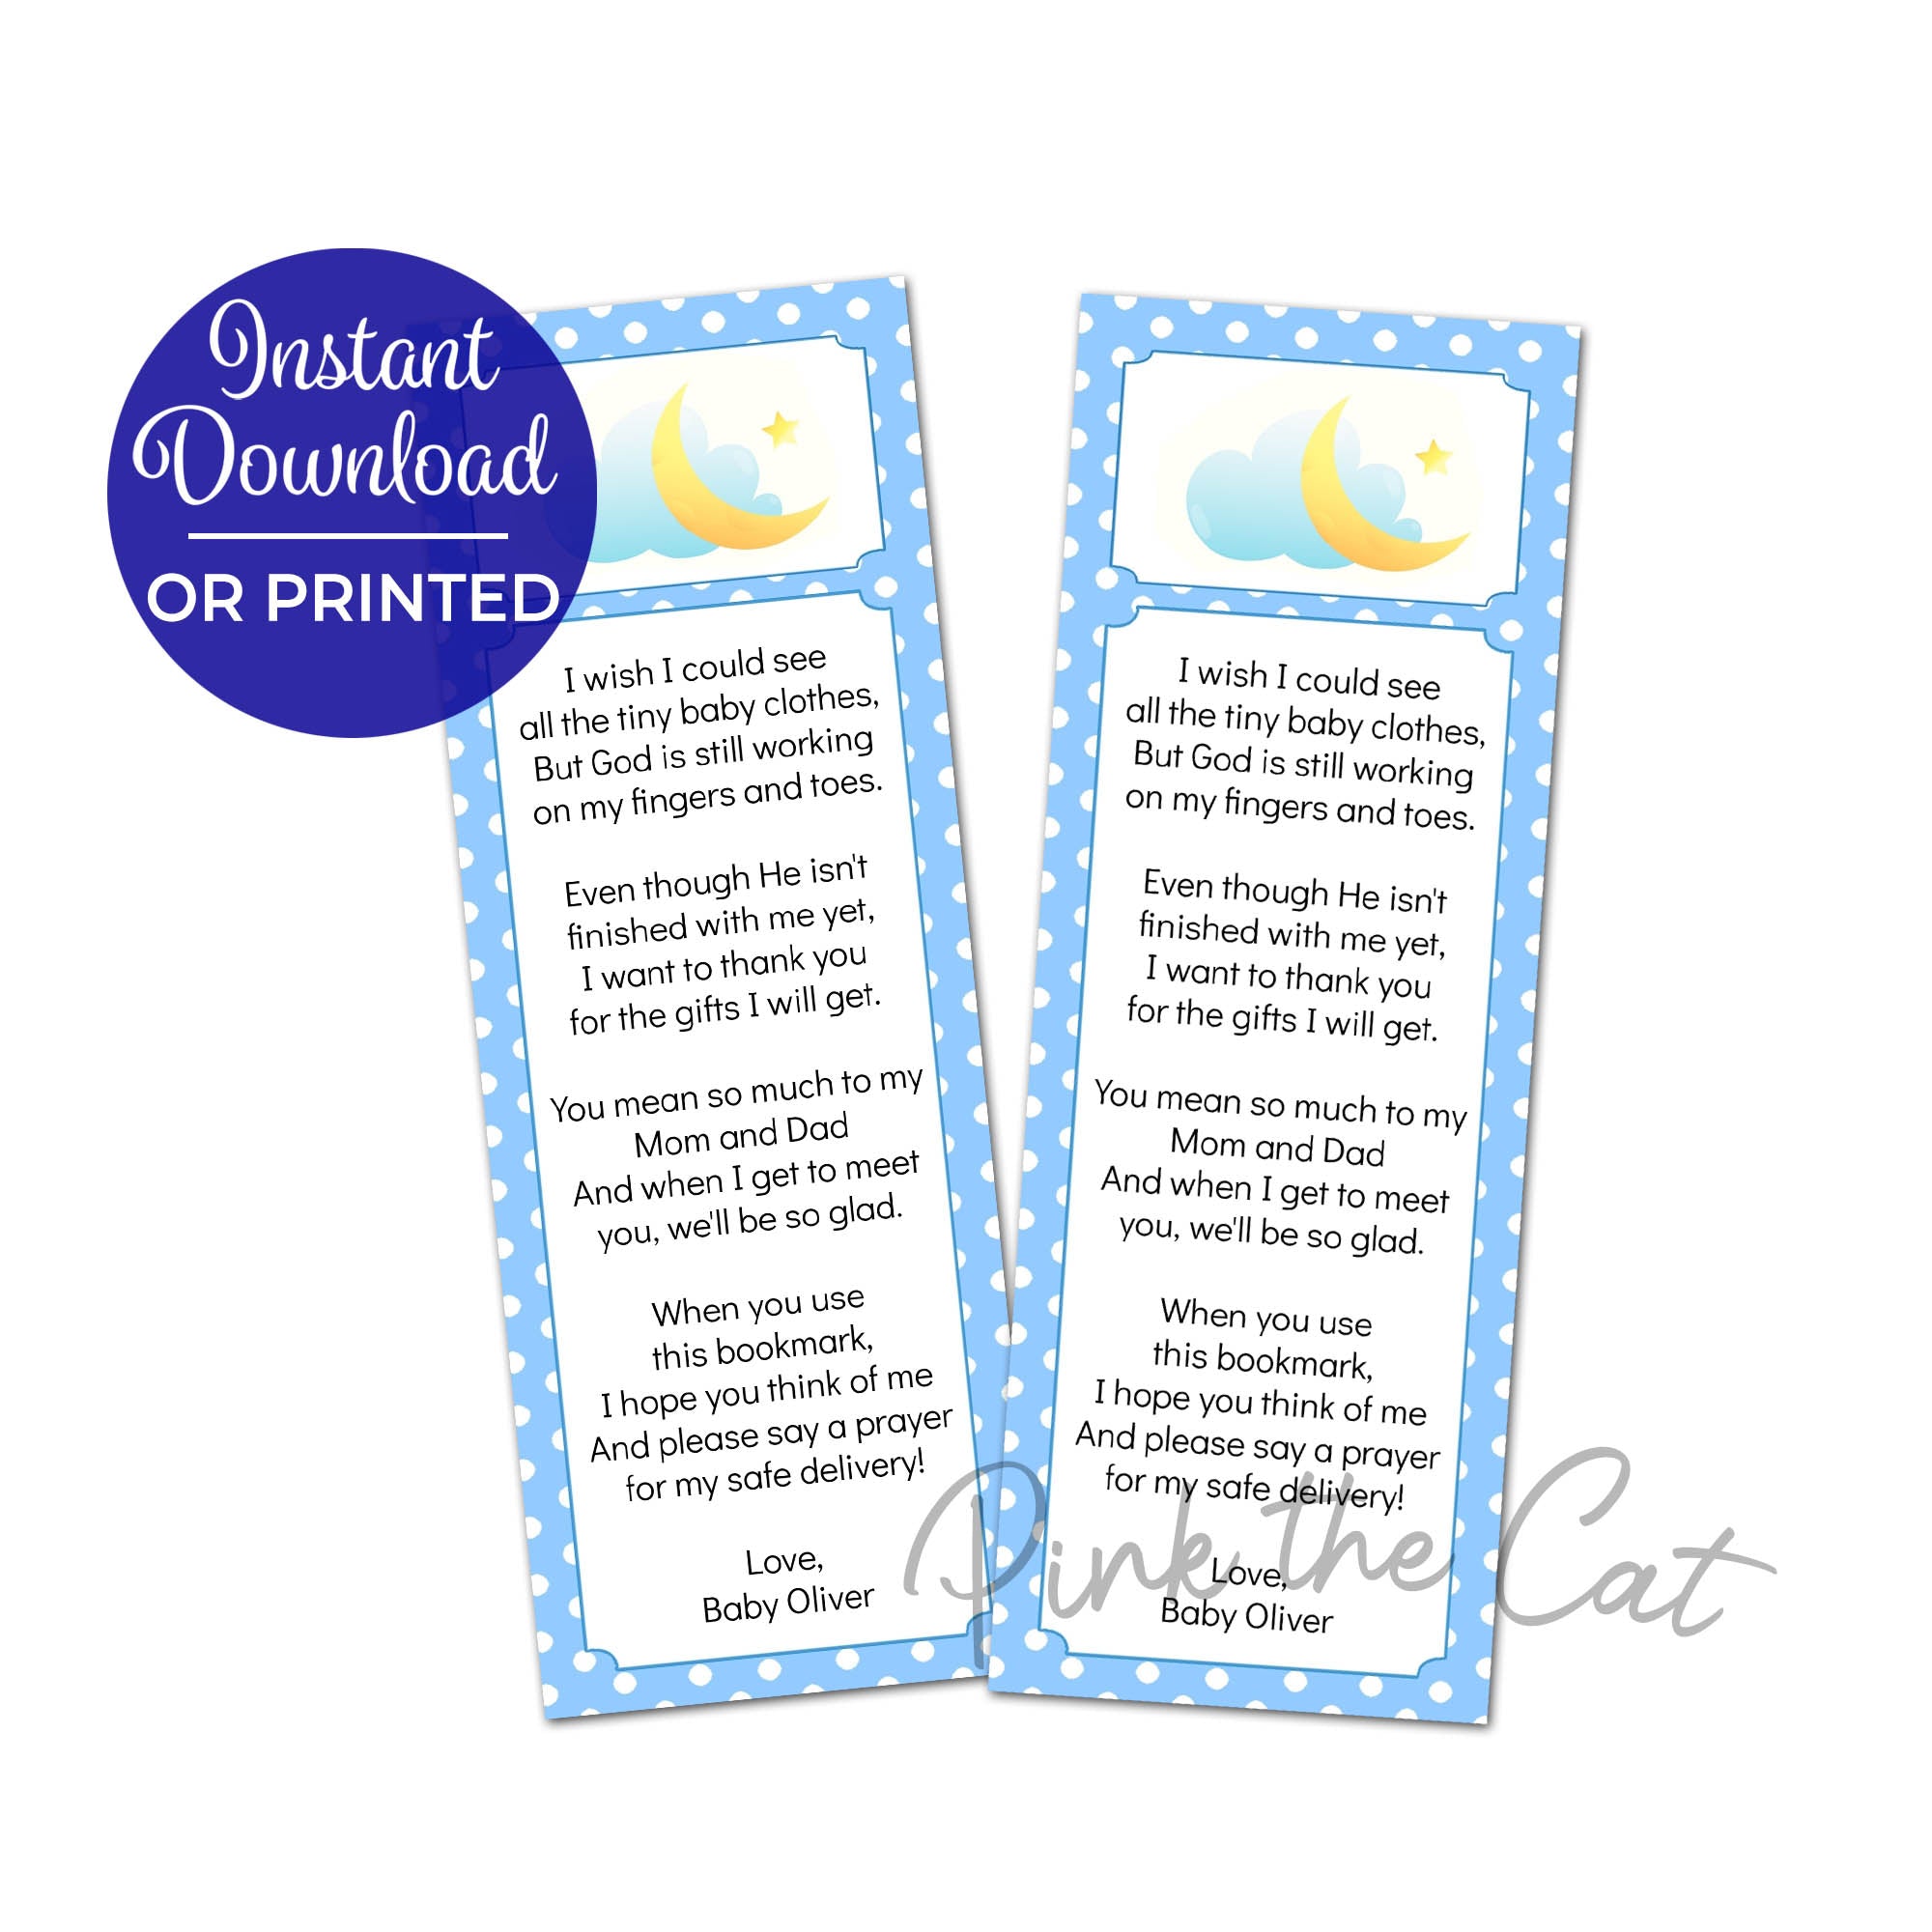 Moon baby shower bookmarks